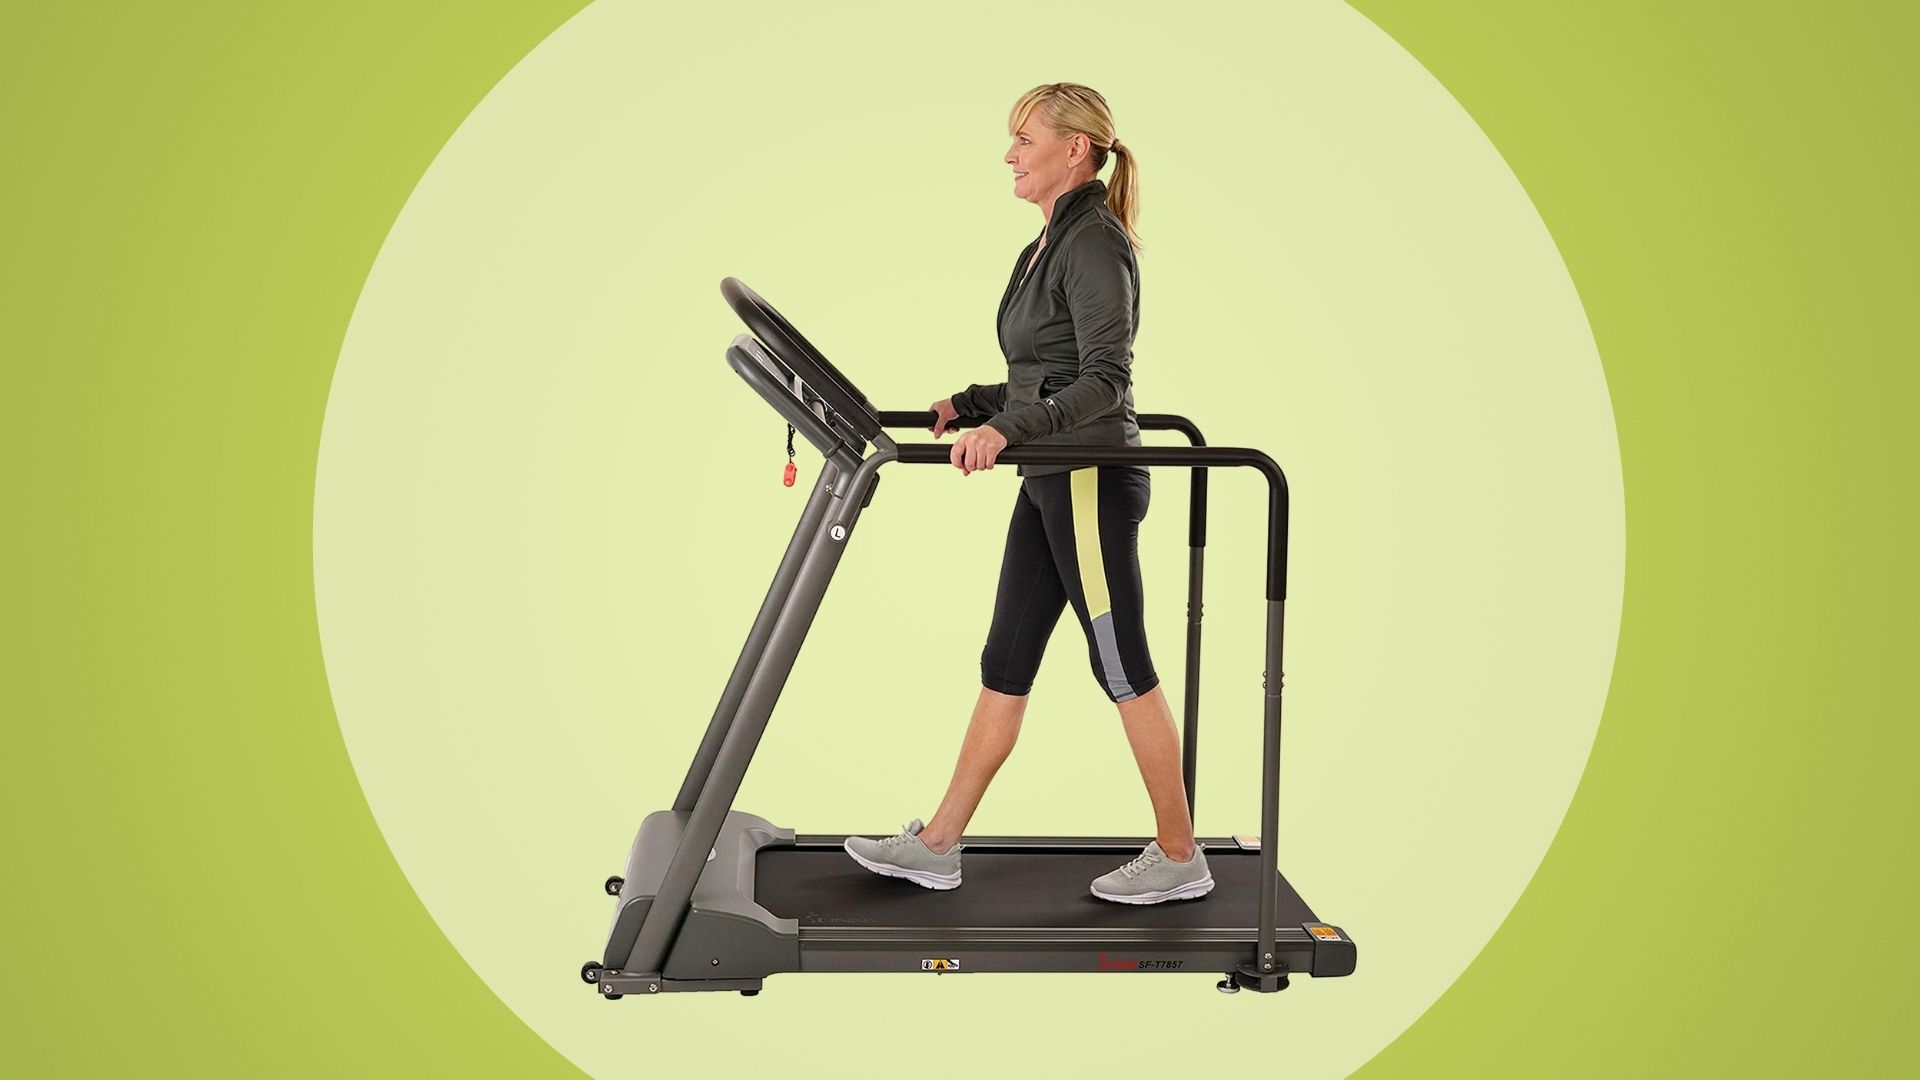 Indoor Treadmill For Elderly Fitness Exercise Limb Home Training w/ LCD Display 